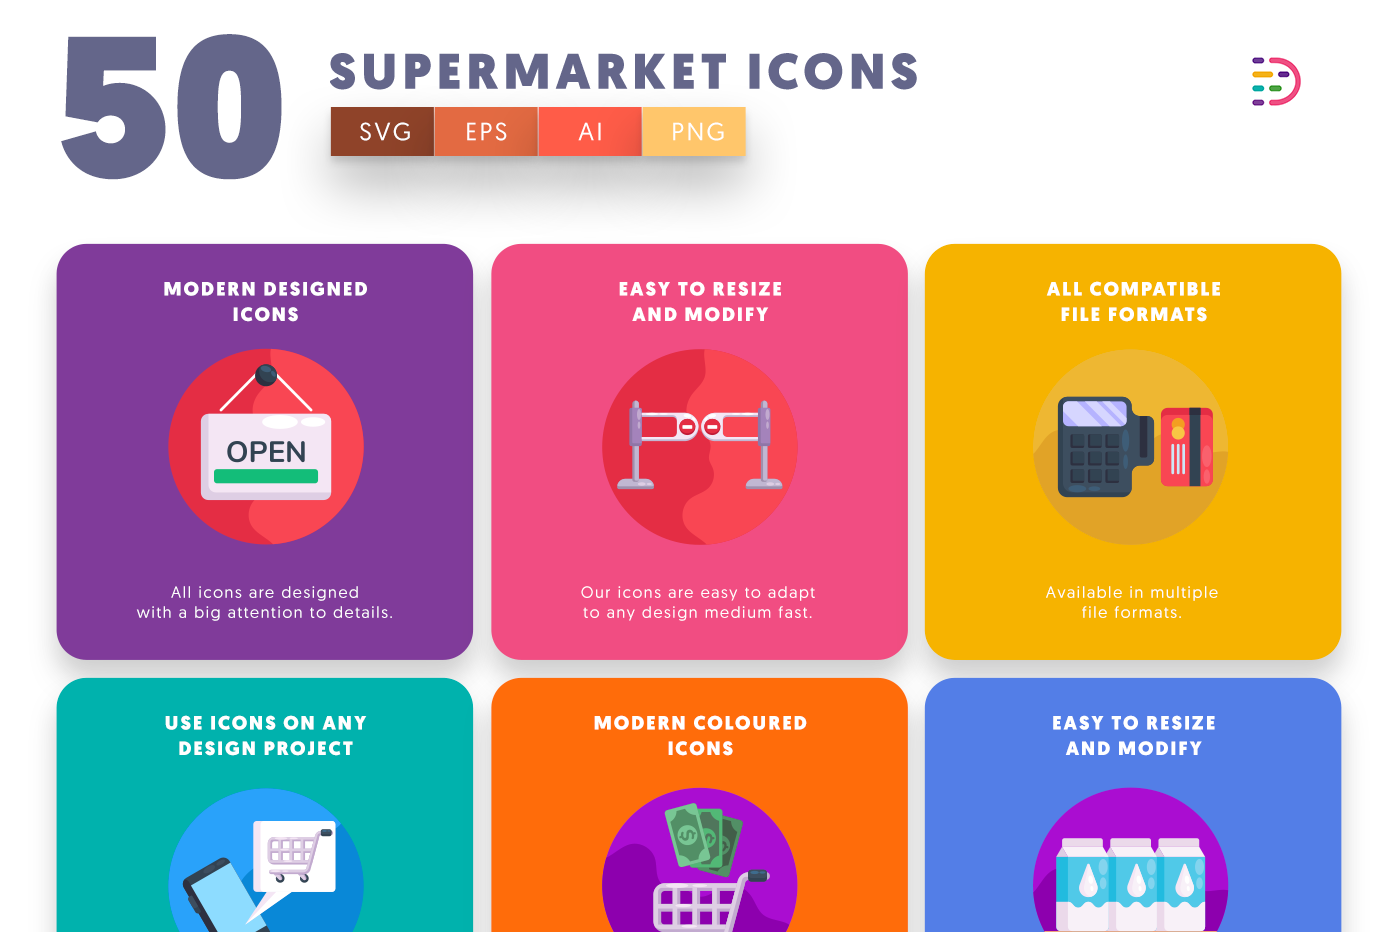  Supermarket Icons with colored backgrounds 